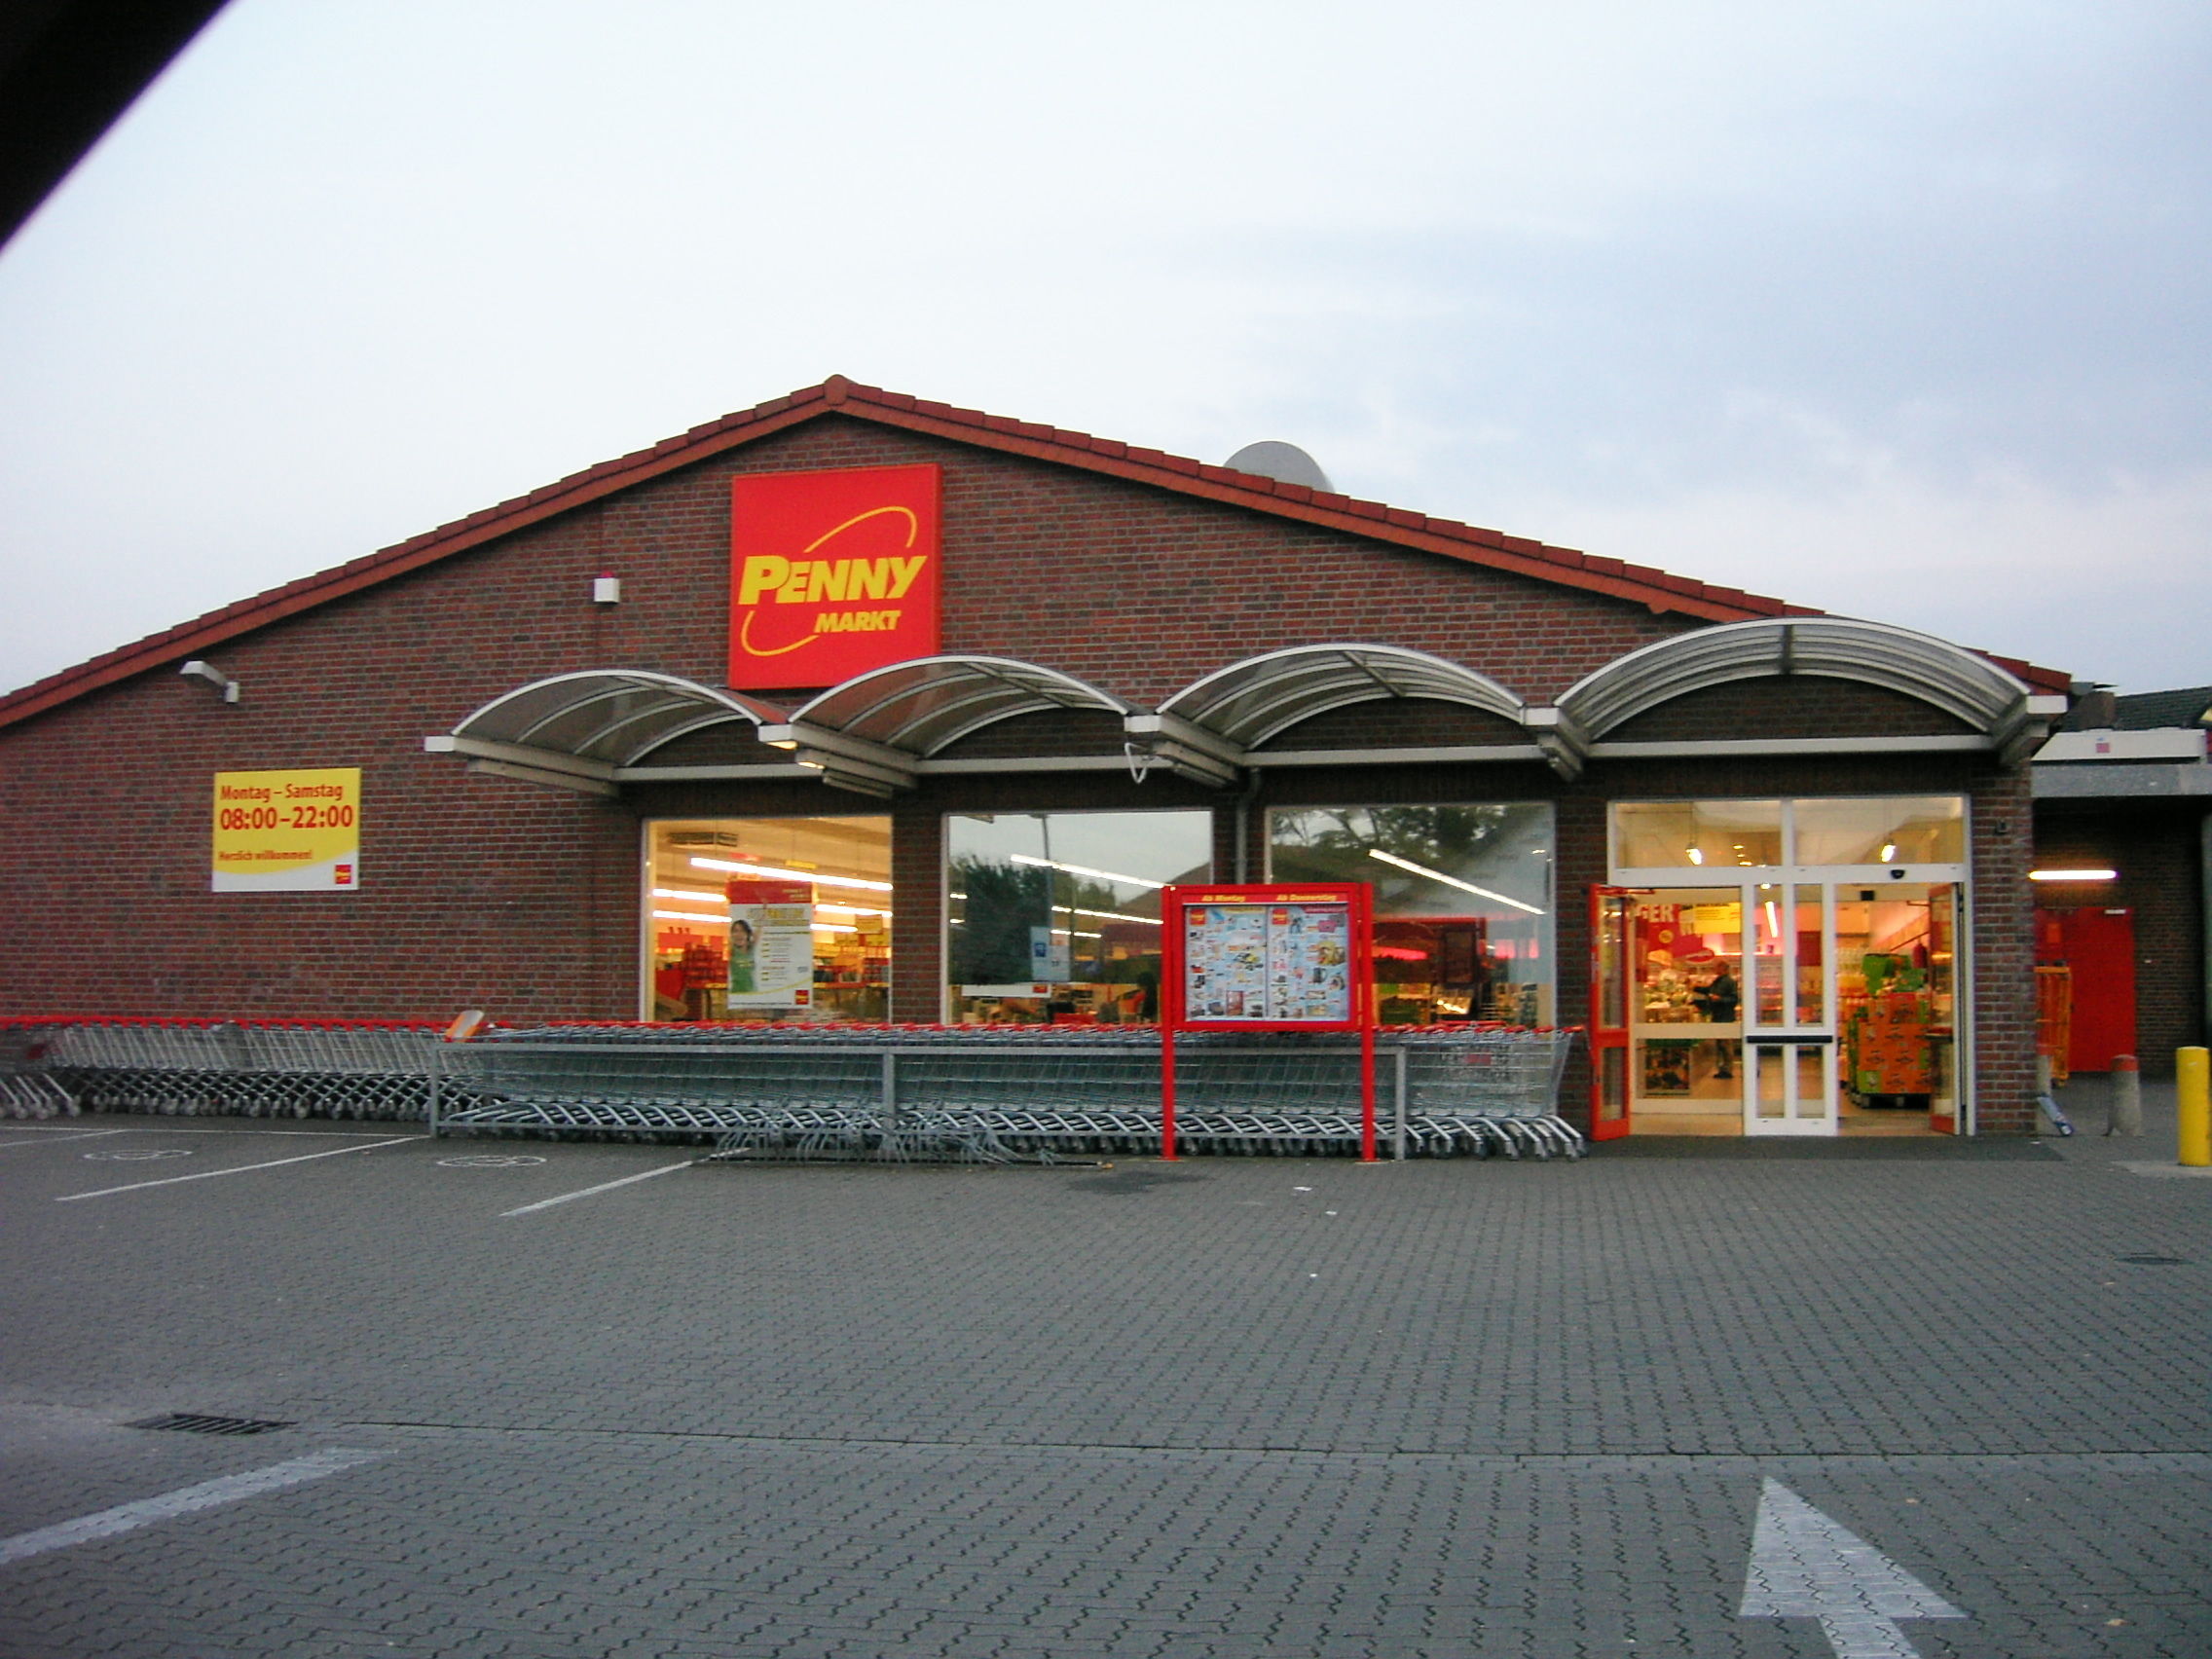 Food discounters in Germany, Penny